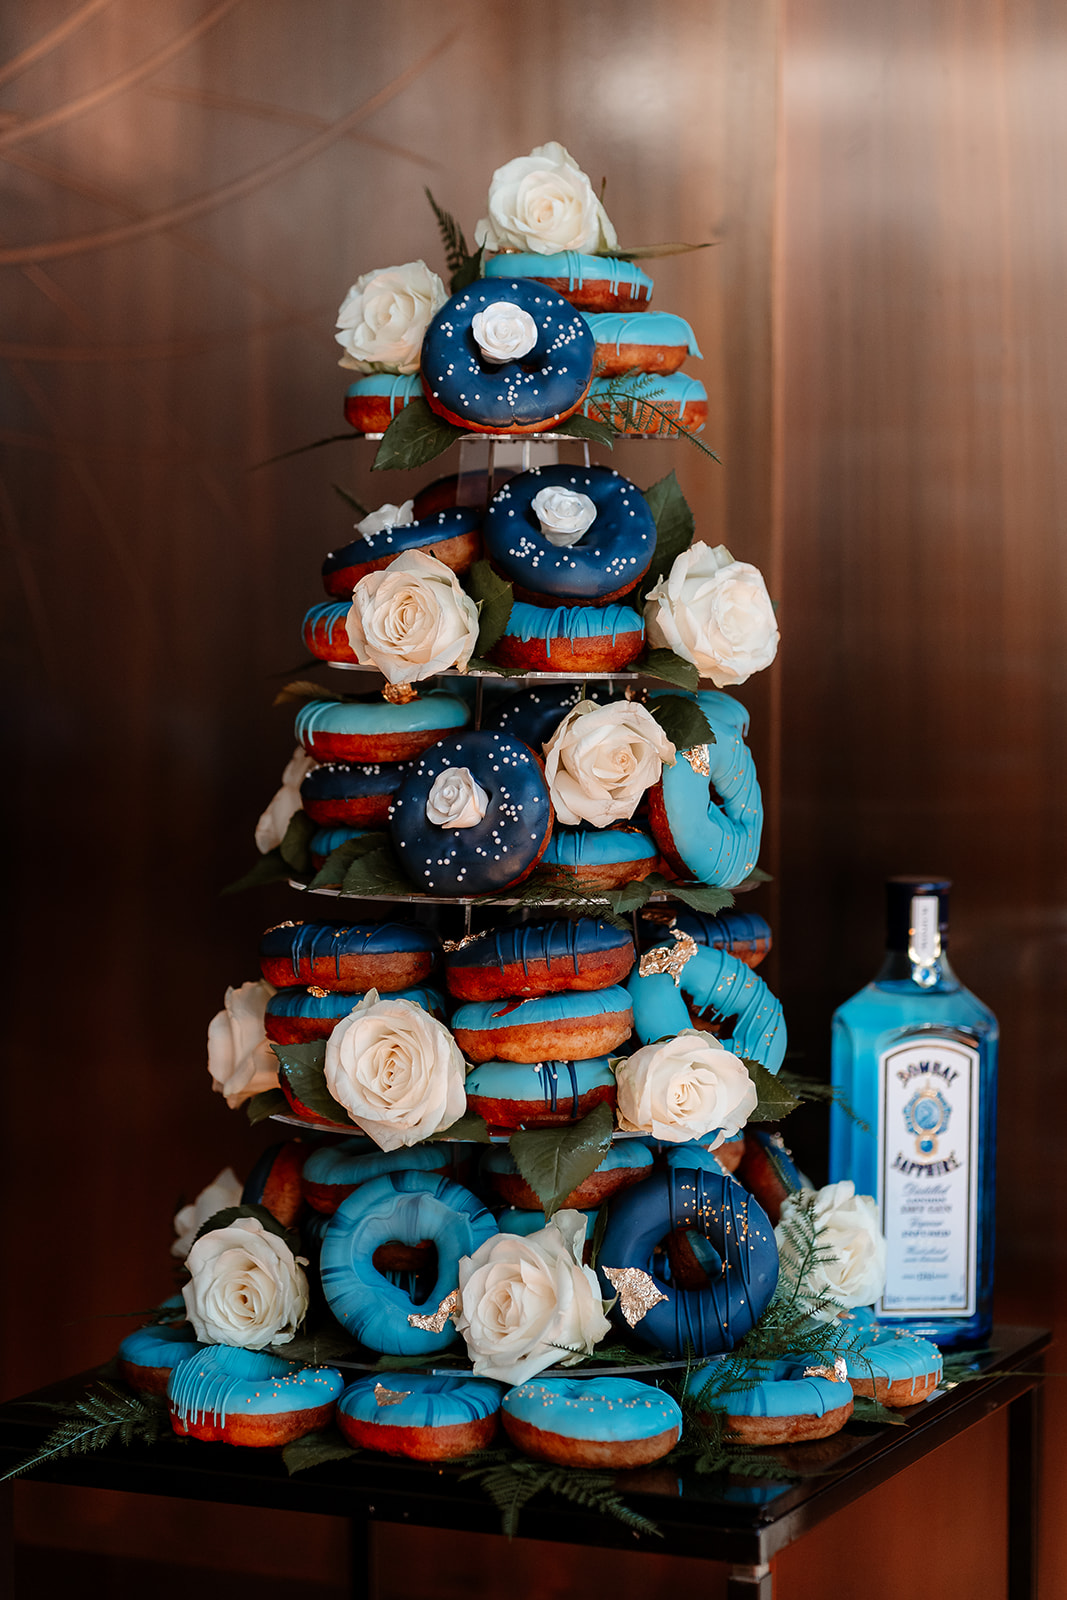 A tower of ring doughnuts decorated with blue icing and white roses next to a bottle of Bombay Sapphire gin. 